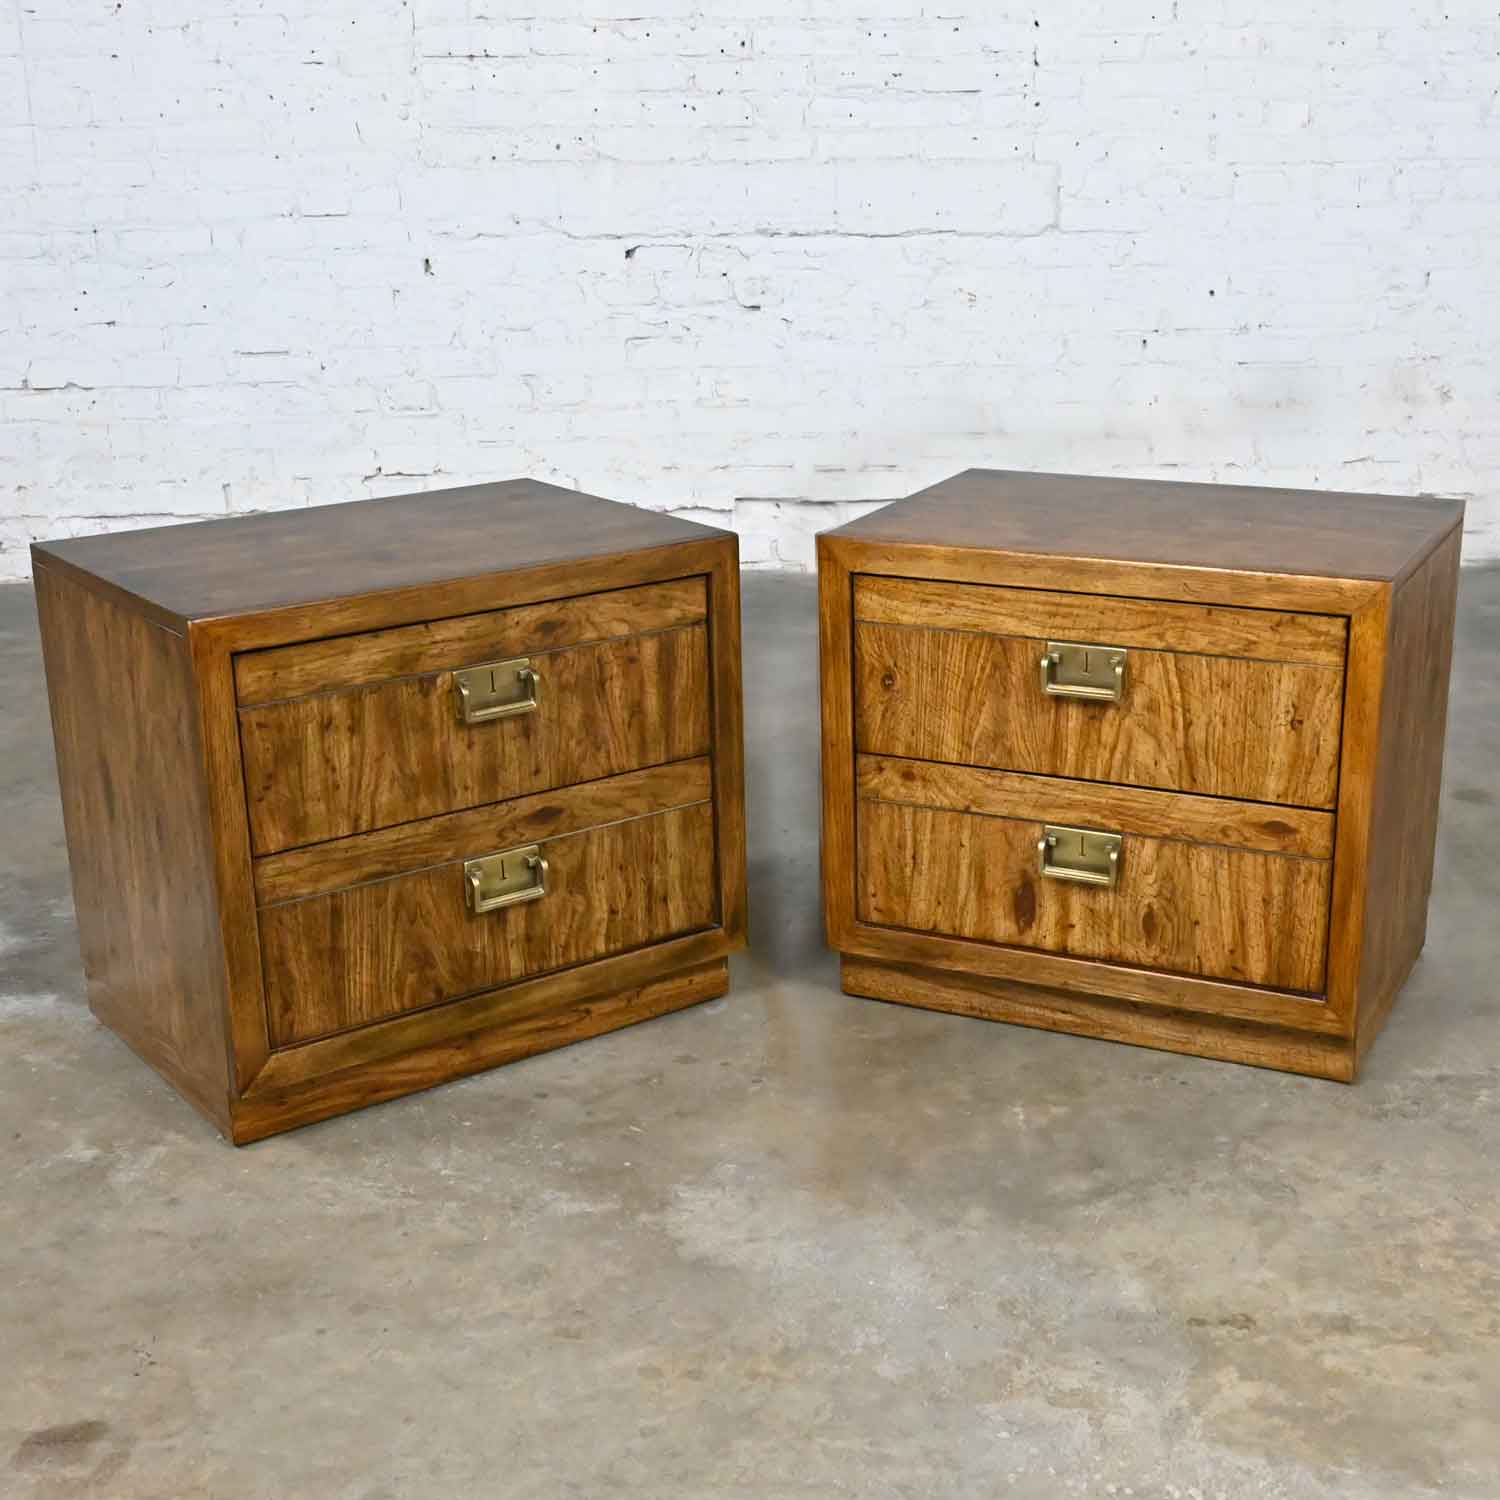 Vintage Drexel Weatherwood Collection Campaign Cabinet Style Pair of Nightstands End or Side Tables